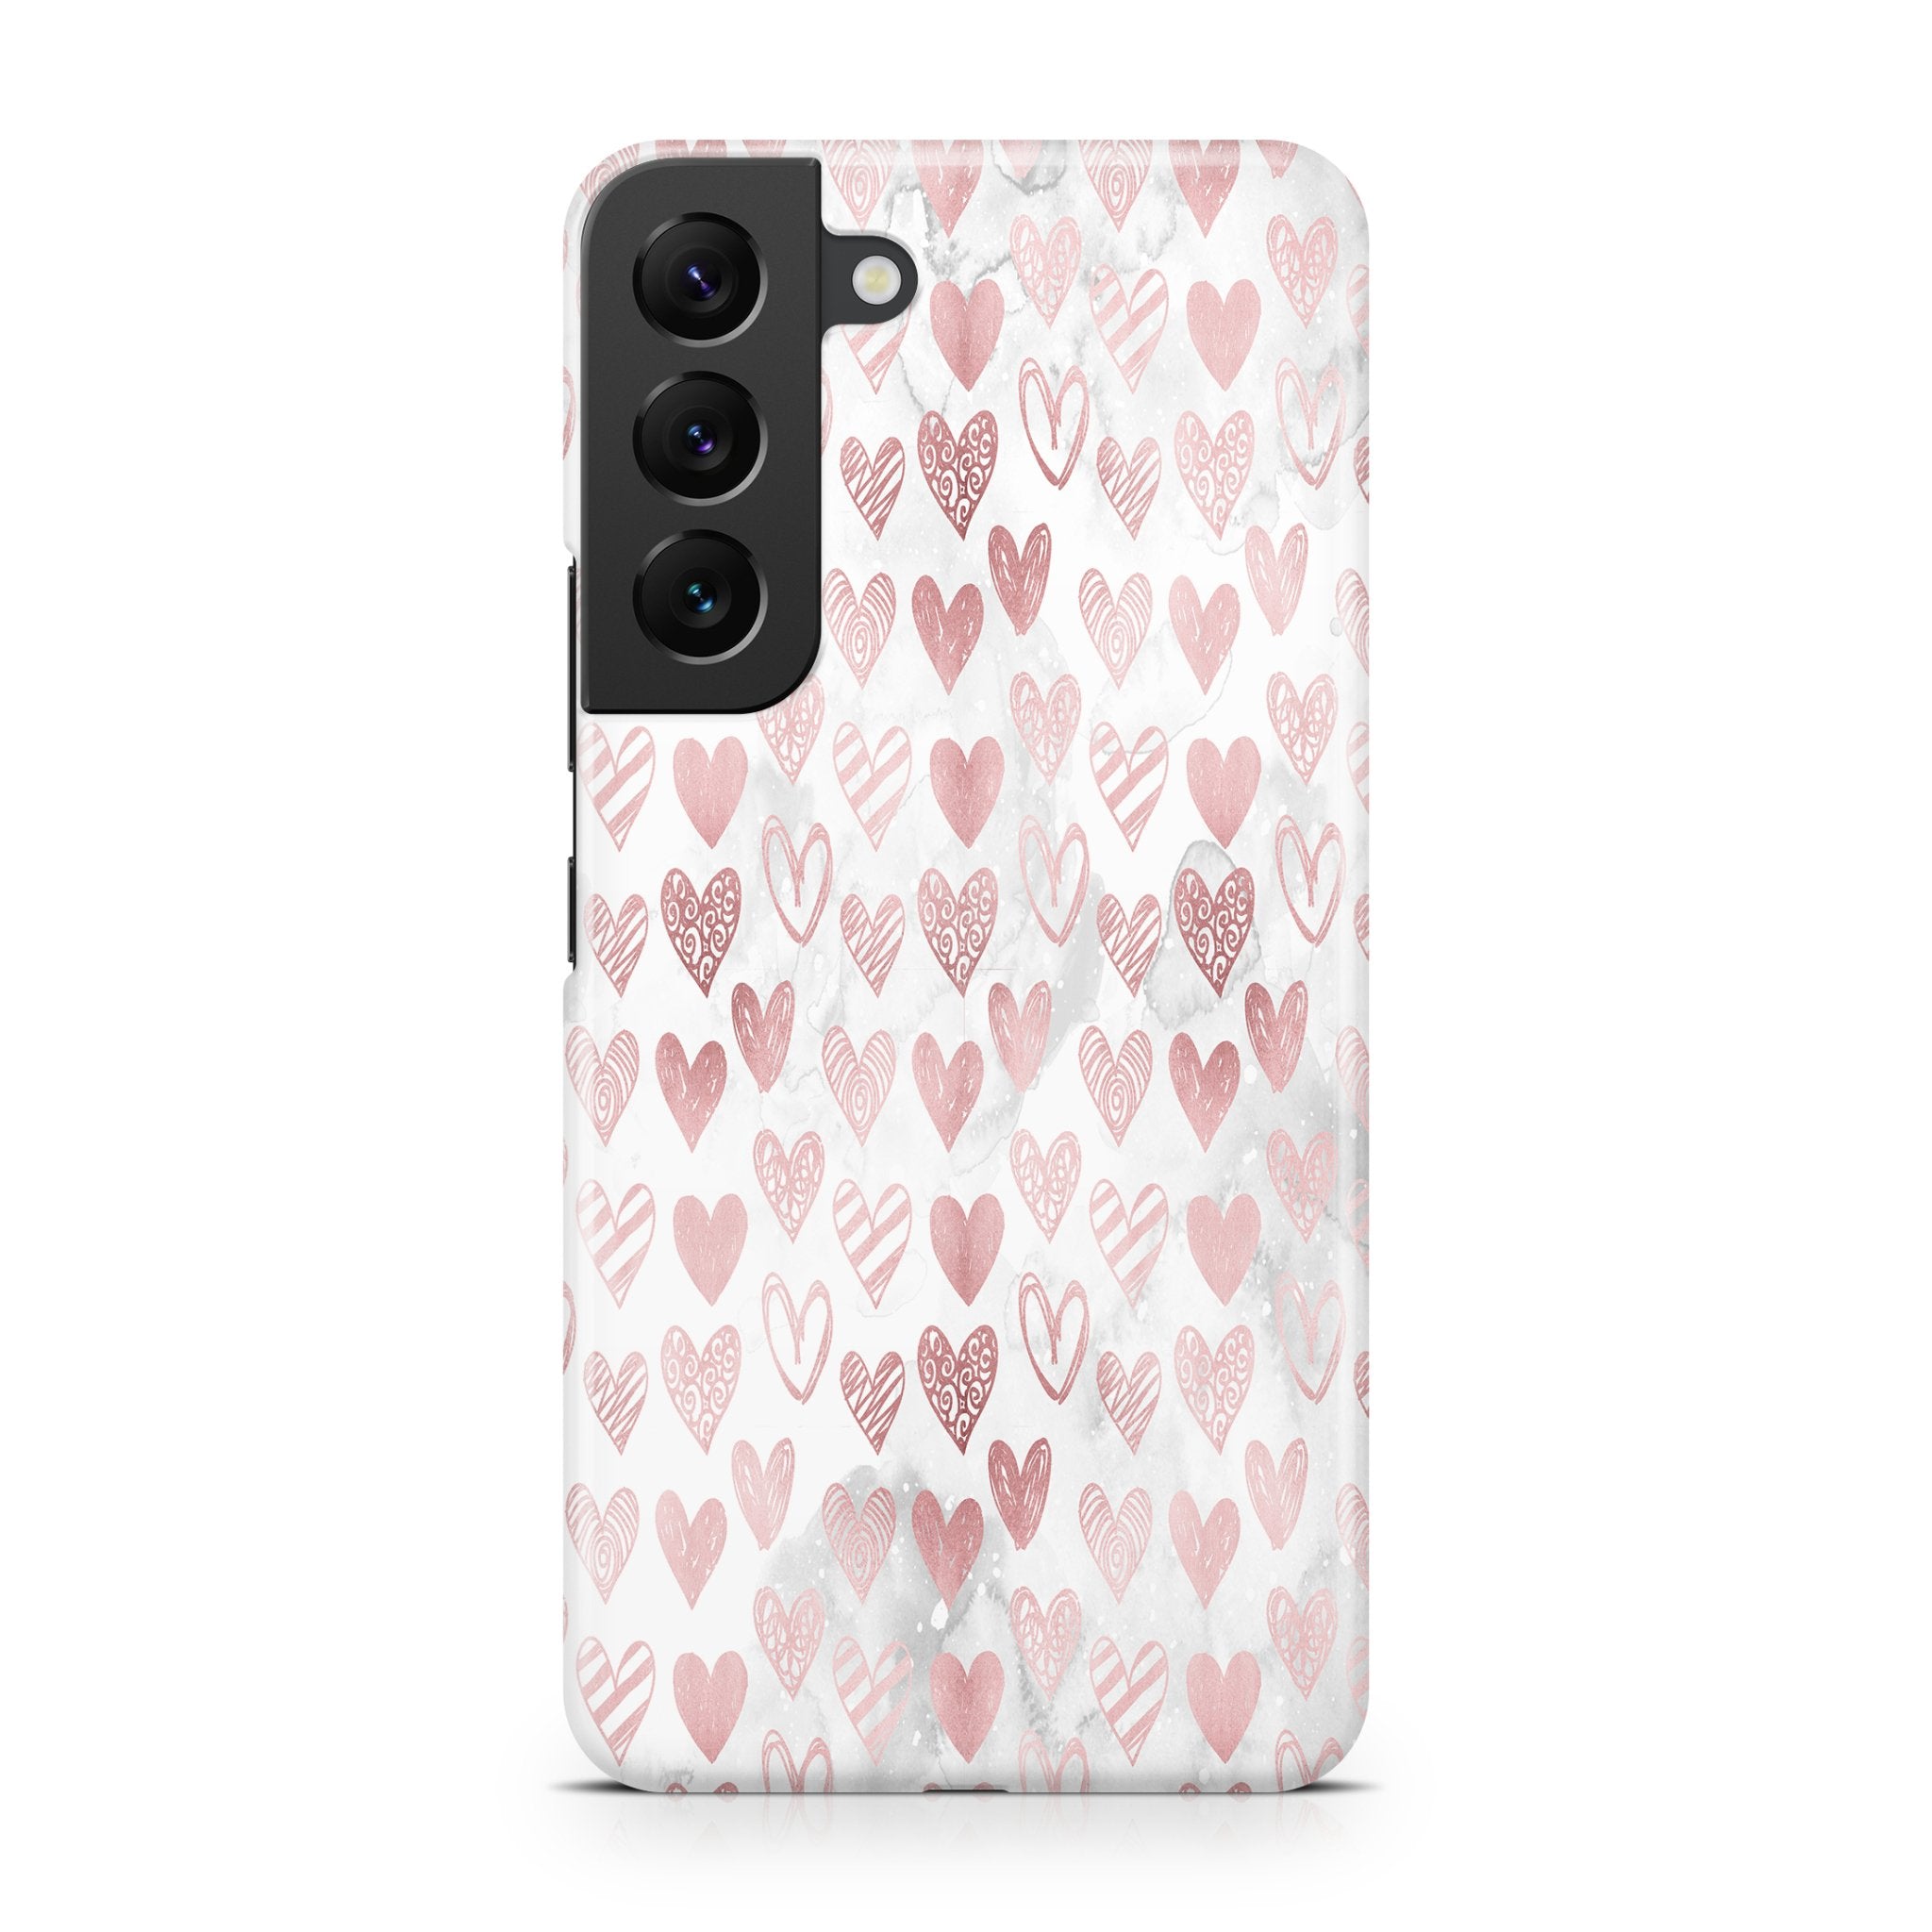 Pink Heart - Samsung phone case designs by CaseSwagger